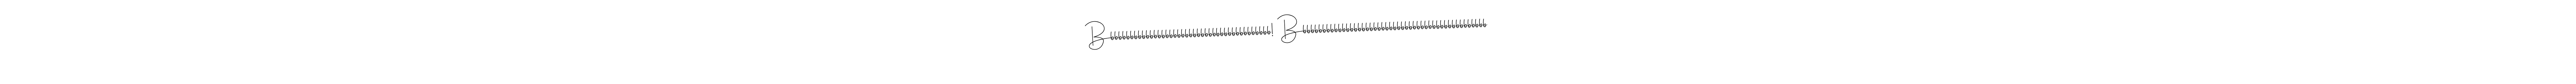 You can use this online signature creator to create a handwritten signature for the name Bbbbbbbbbbbbbbbbbbbbbbbbbbbbbbbbbbbbbbbbbb! Bbbbbbbbbbbbbbbbbbbbbbbbbbbbbbbbbbbbbbbbbbbbbbbb. This is the best online autograph maker. Bbbbbbbbbbbbbbbbbbbbbbbbbbbbbbbbbbbbbbbbbb! Bbbbbbbbbbbbbbbbbbbbbbbbbbbbbbbbbbbbbbbbbbbbbbbb signature style 4 images and pictures png